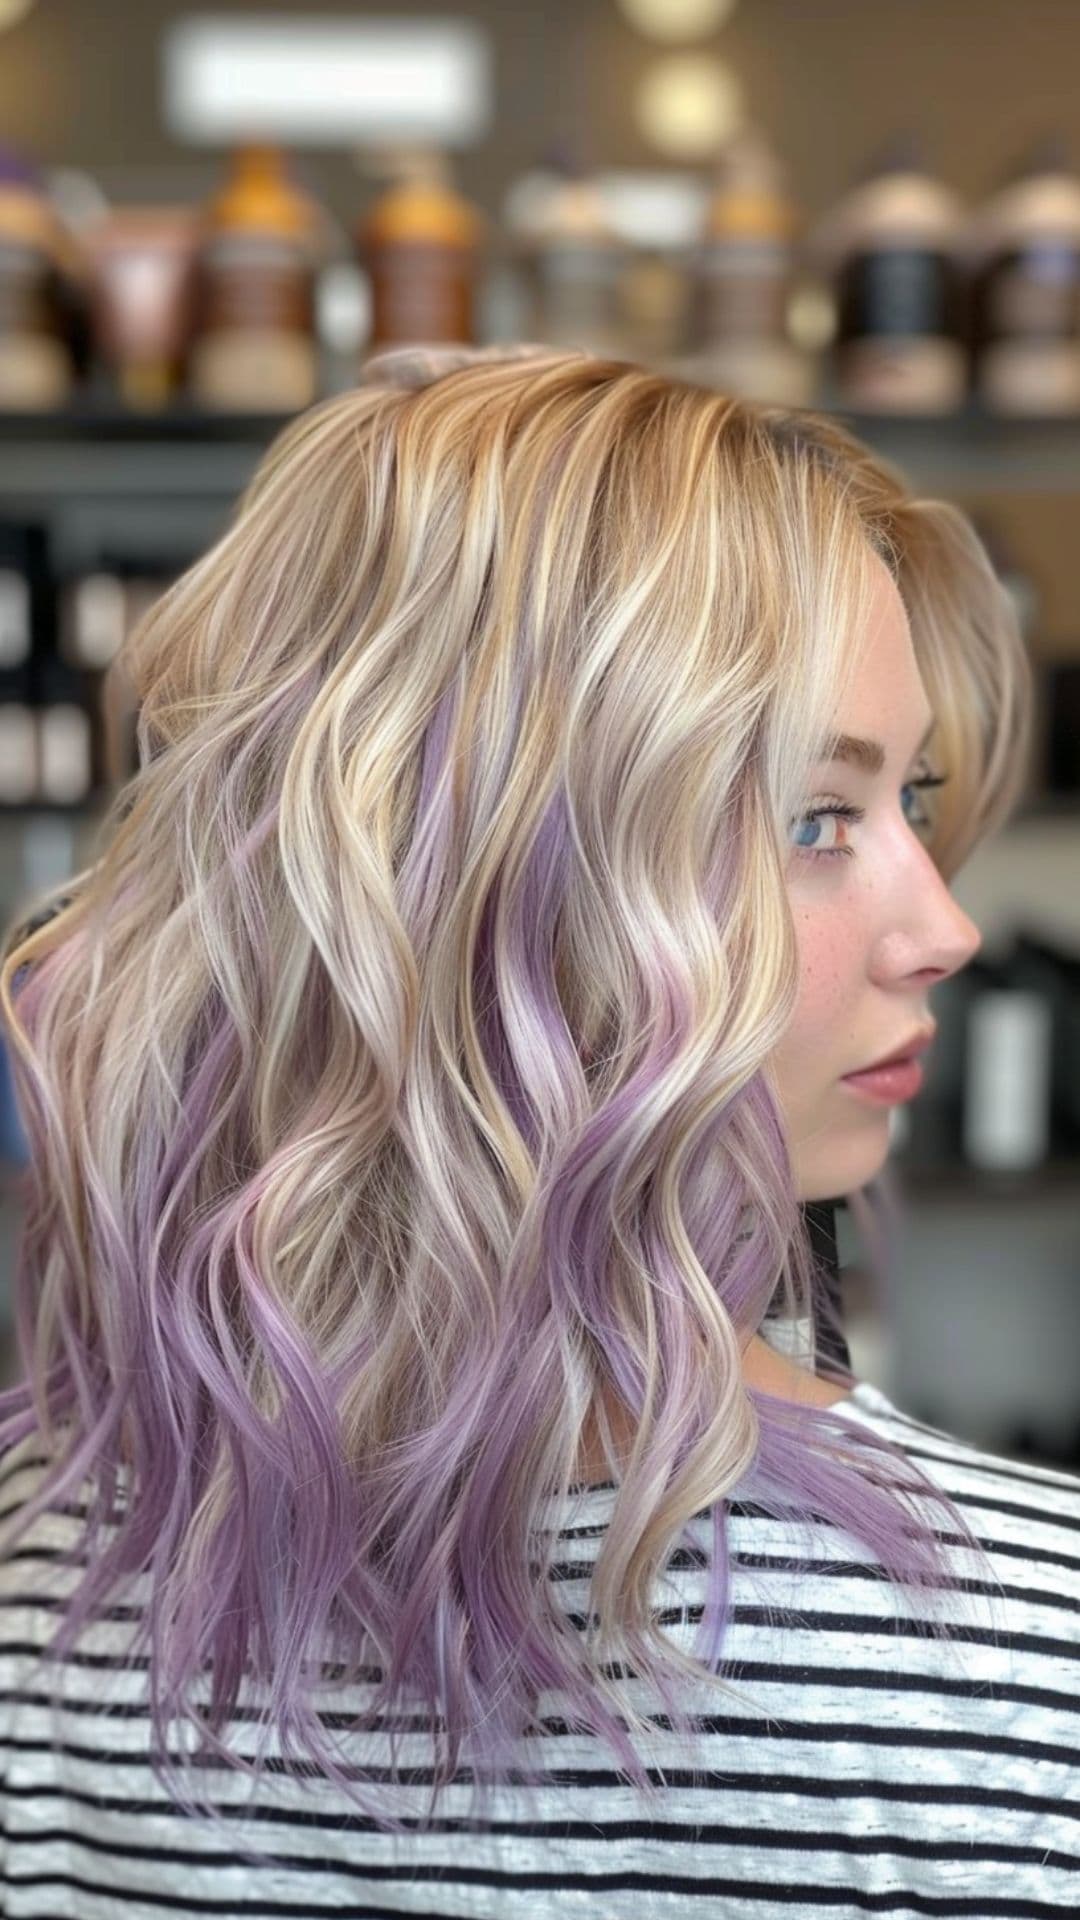 A woman modelling a lilac highlights on blonde hair.